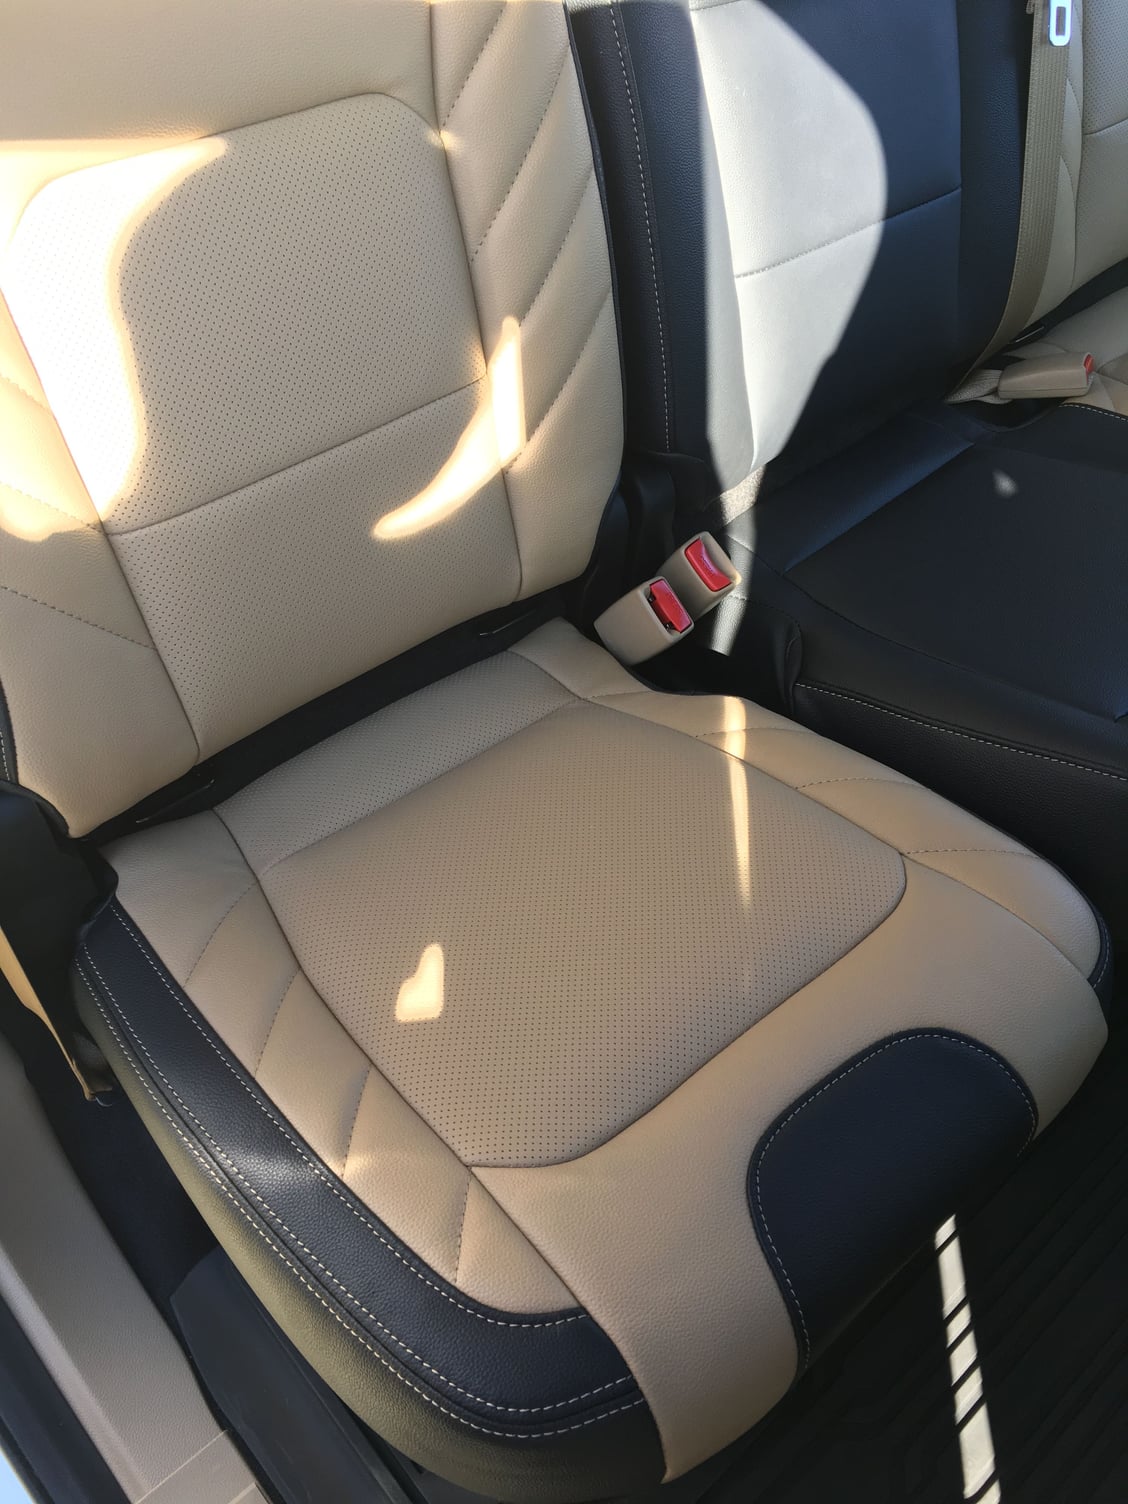 Roadwire Signature Leather Seat Install Ford F150 Forum Community of Ford Truck Fans